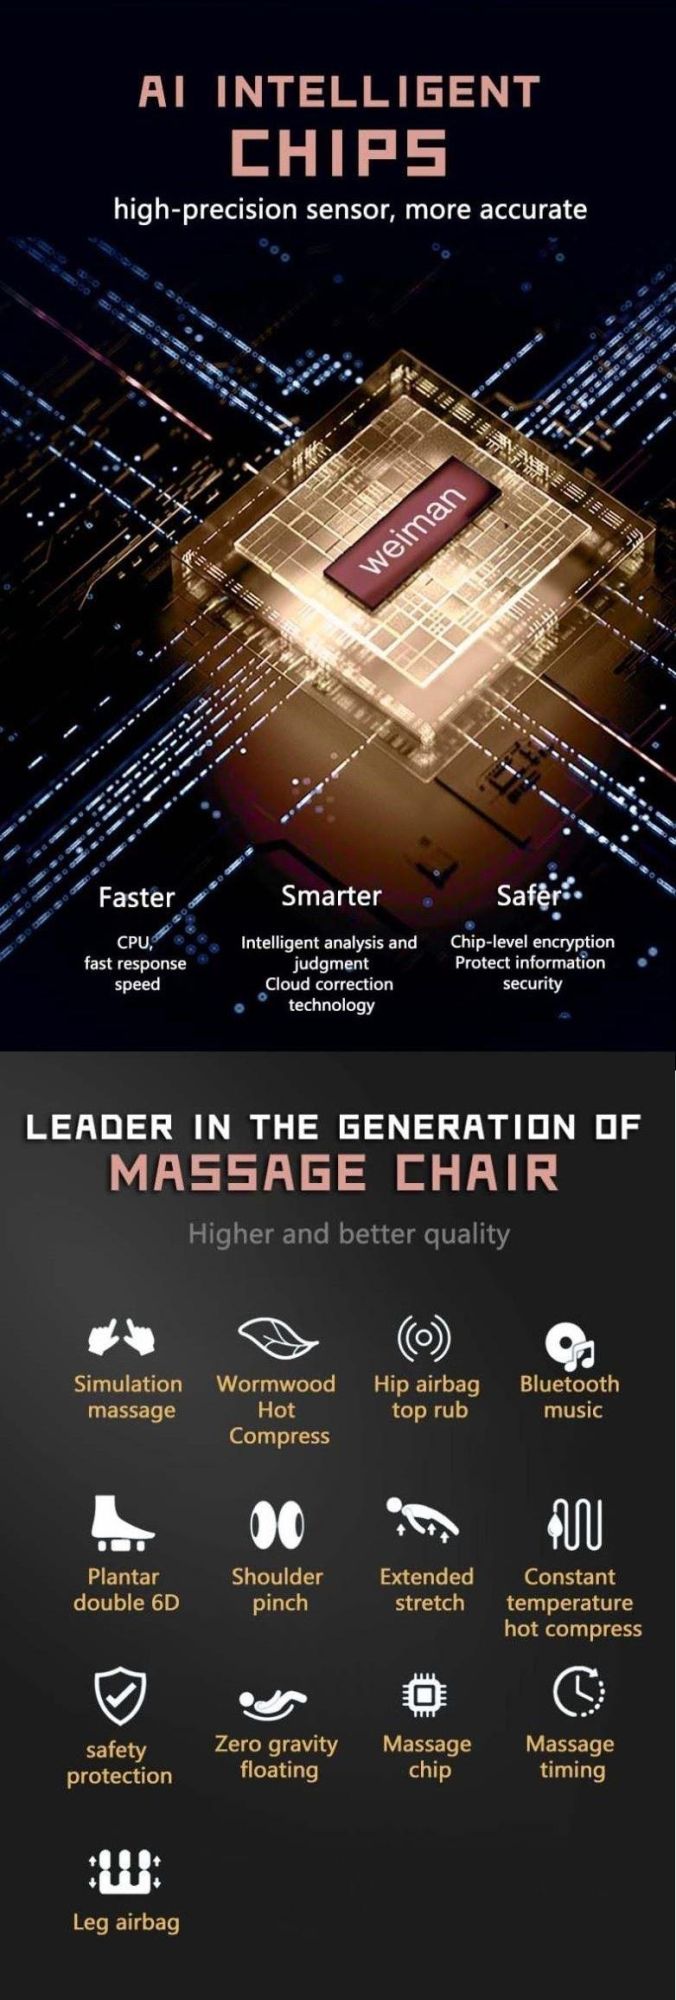 U Shape Pillow Zero Gravity First Full Body Kneading Tapping Massage Chair with Heat in Hip and Waist